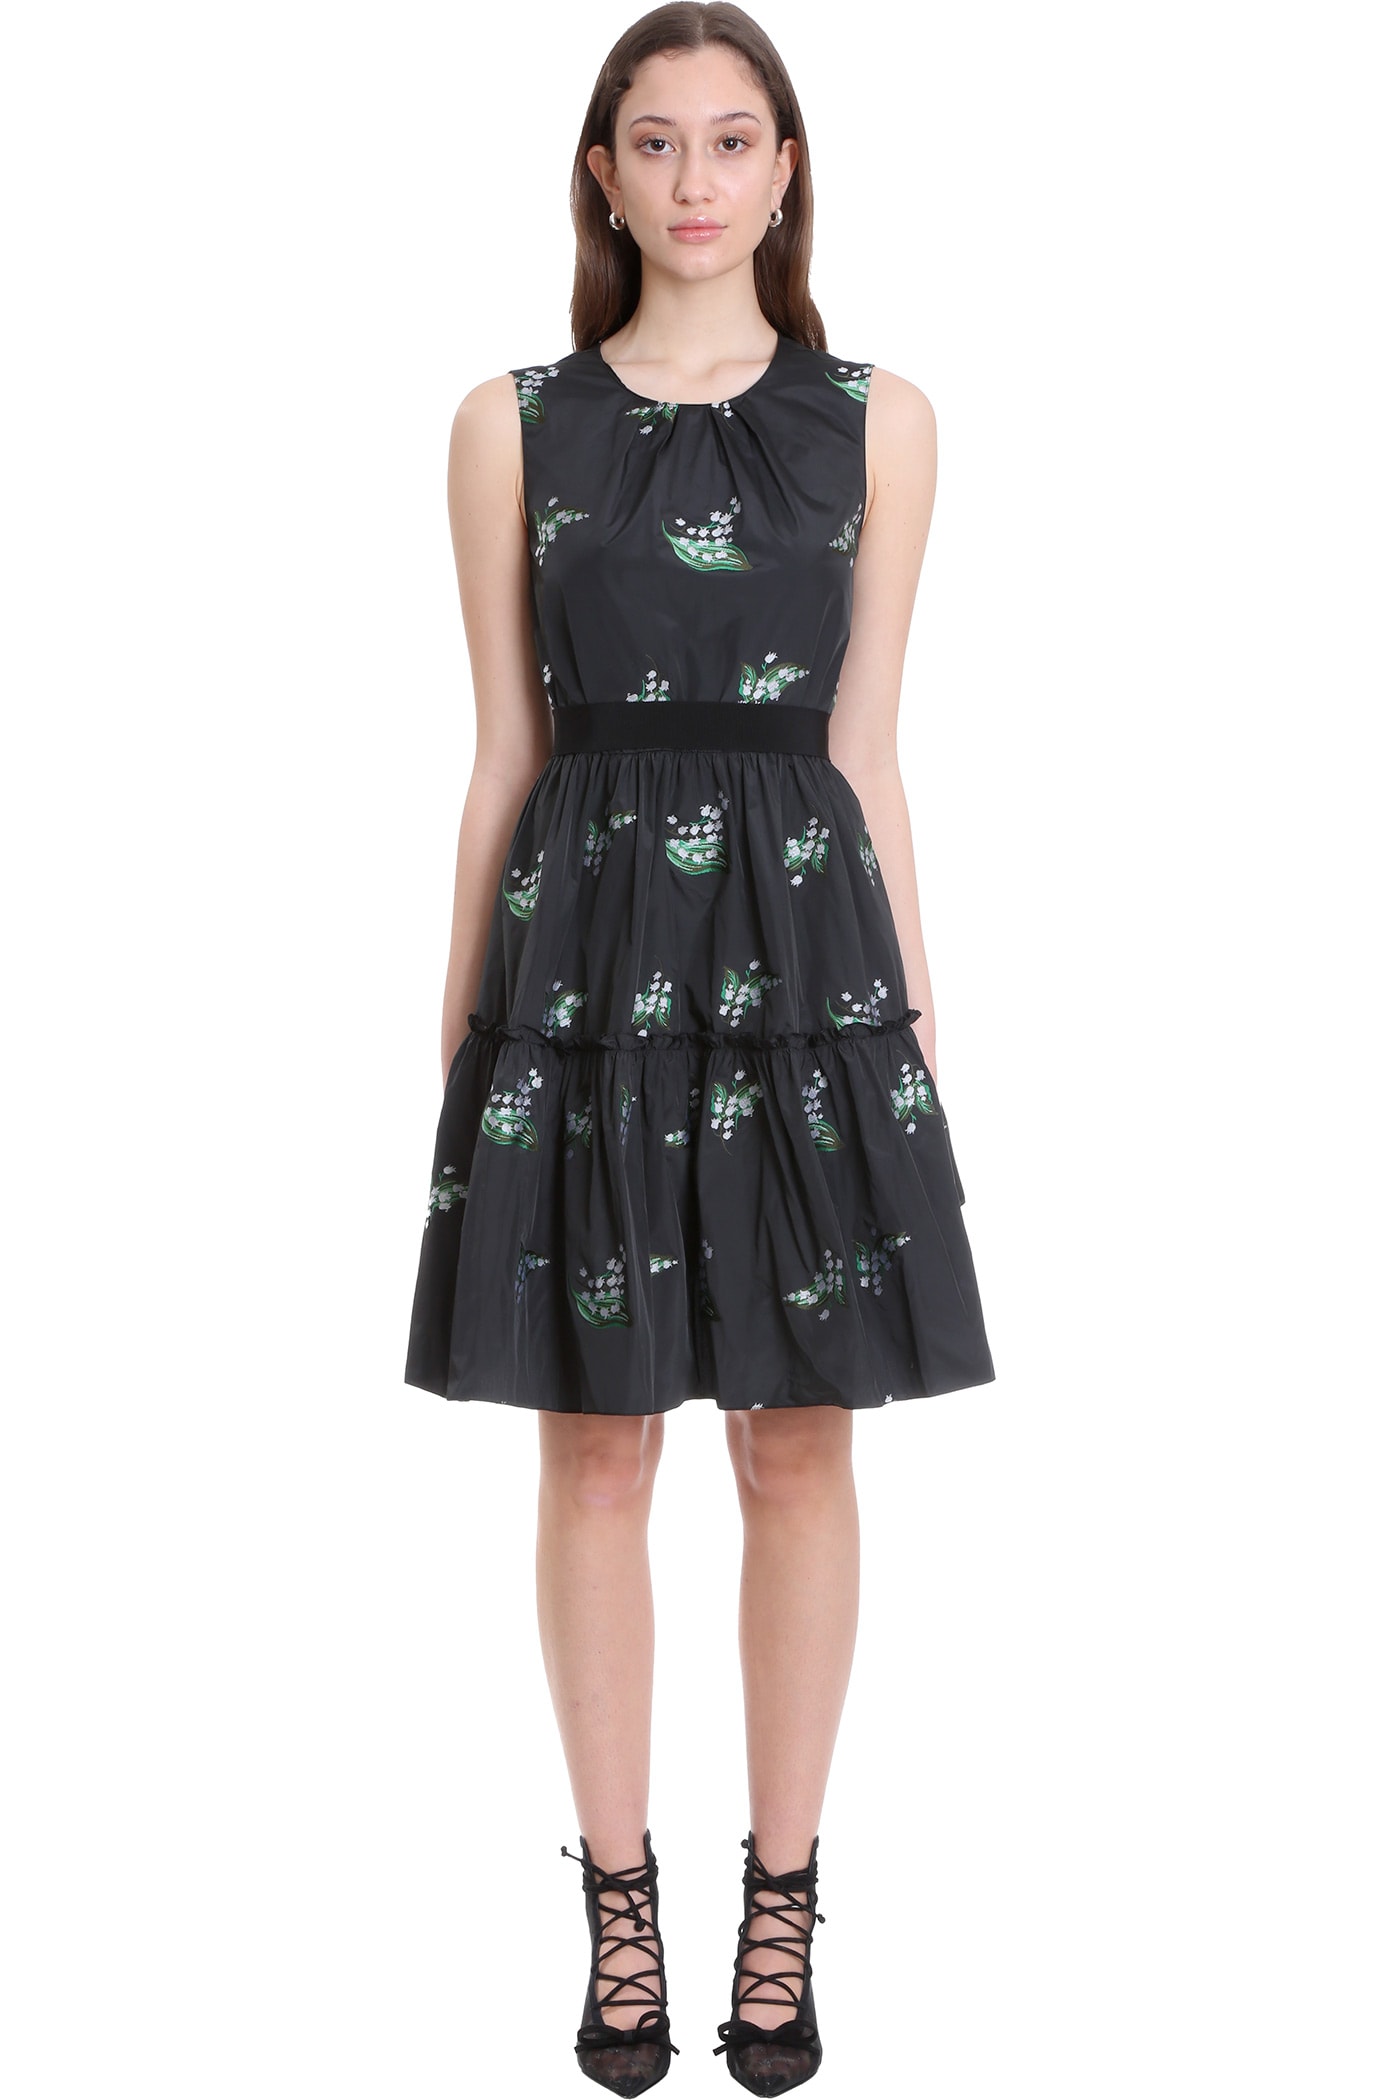 RED Valentino Dress In Black Synthetic Fibers